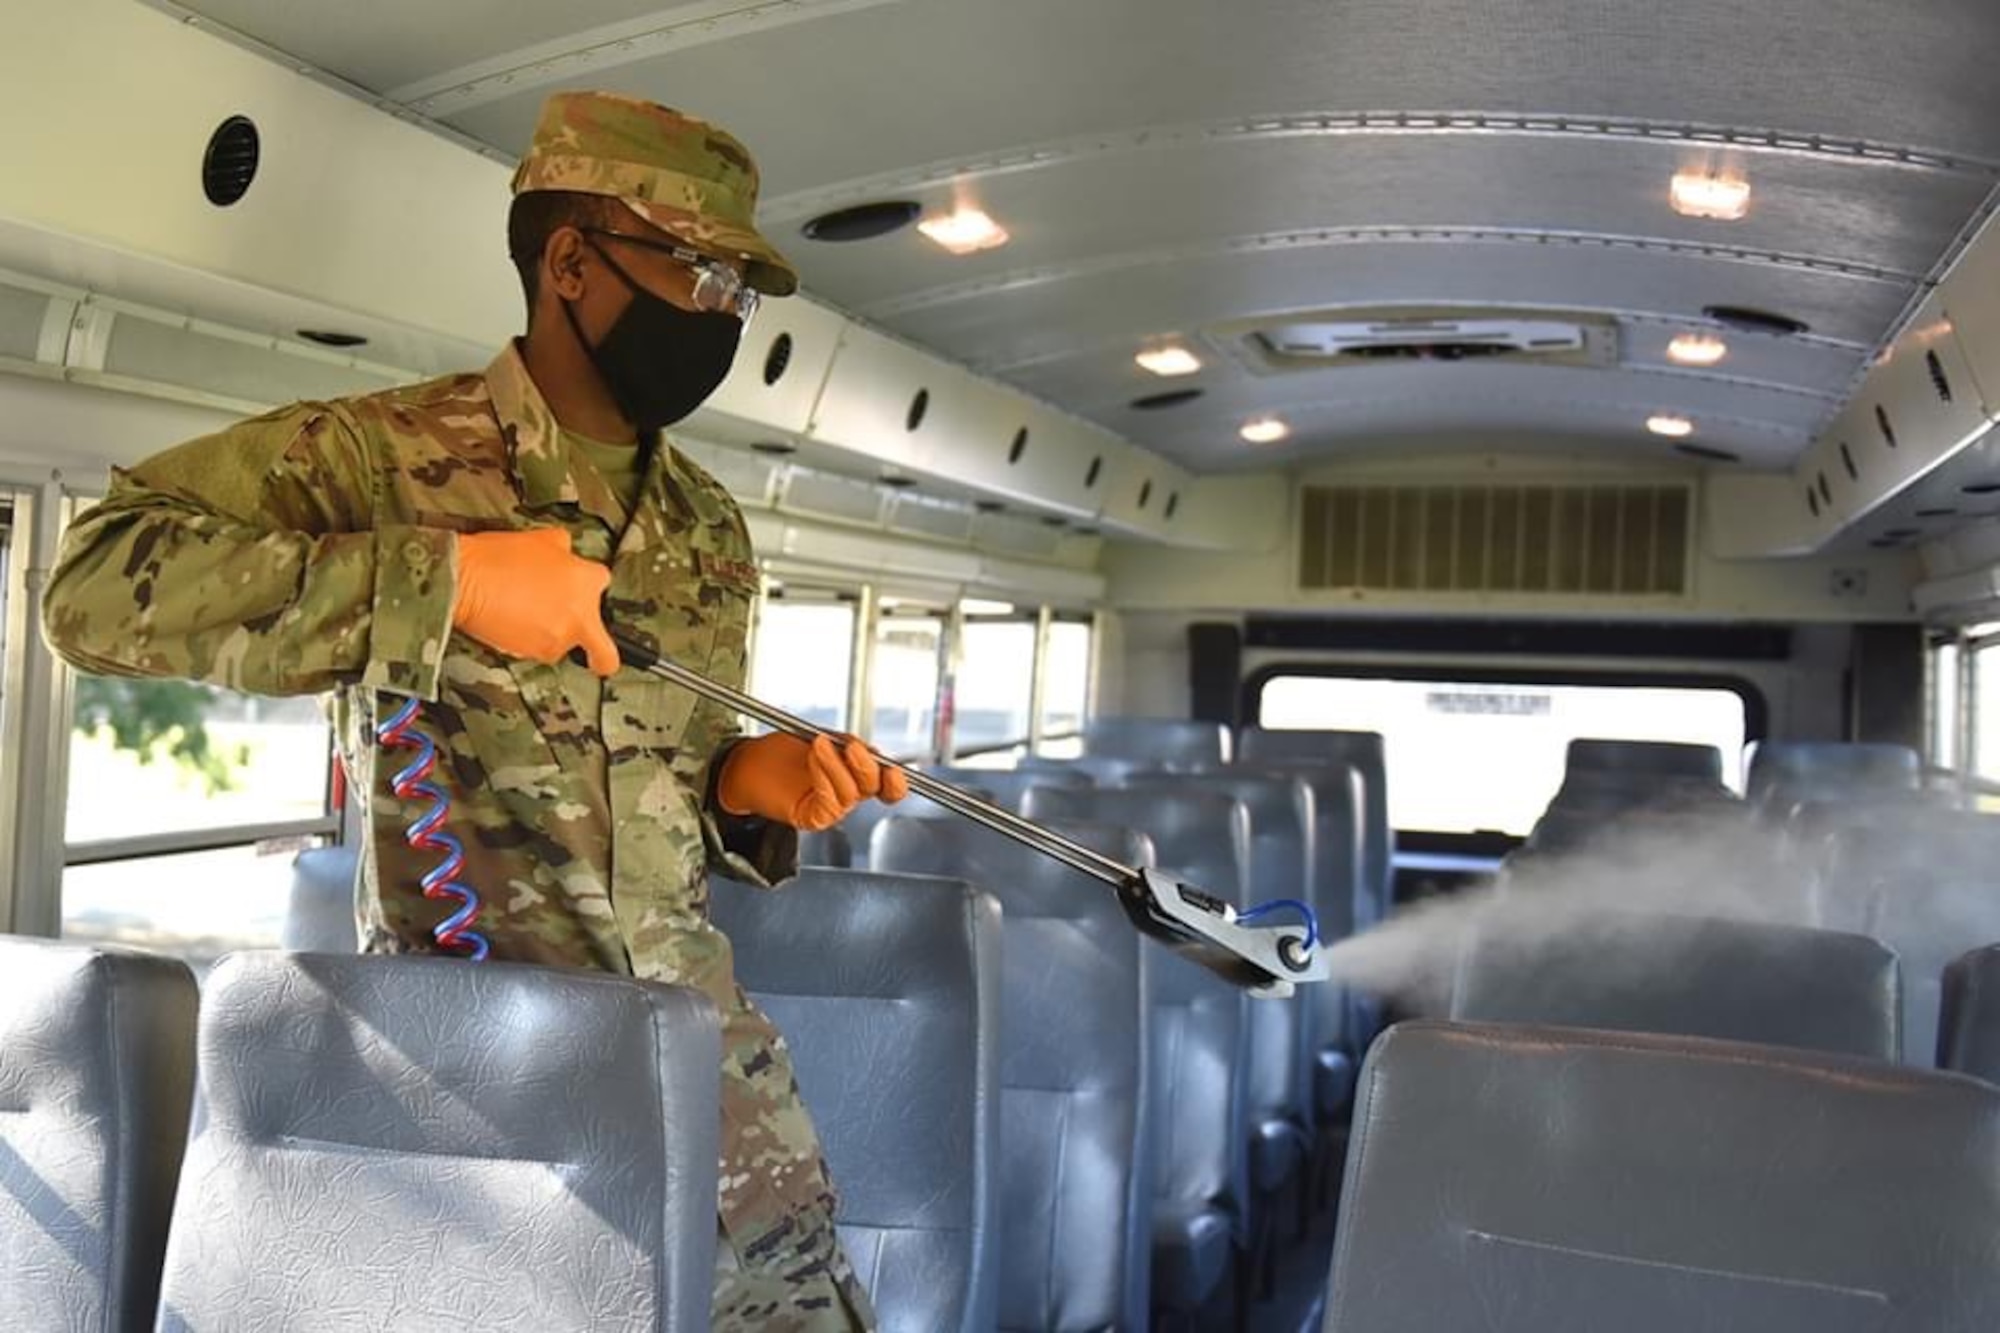 Photo shows an Airman spraying disinfectant on seats inside a bus.